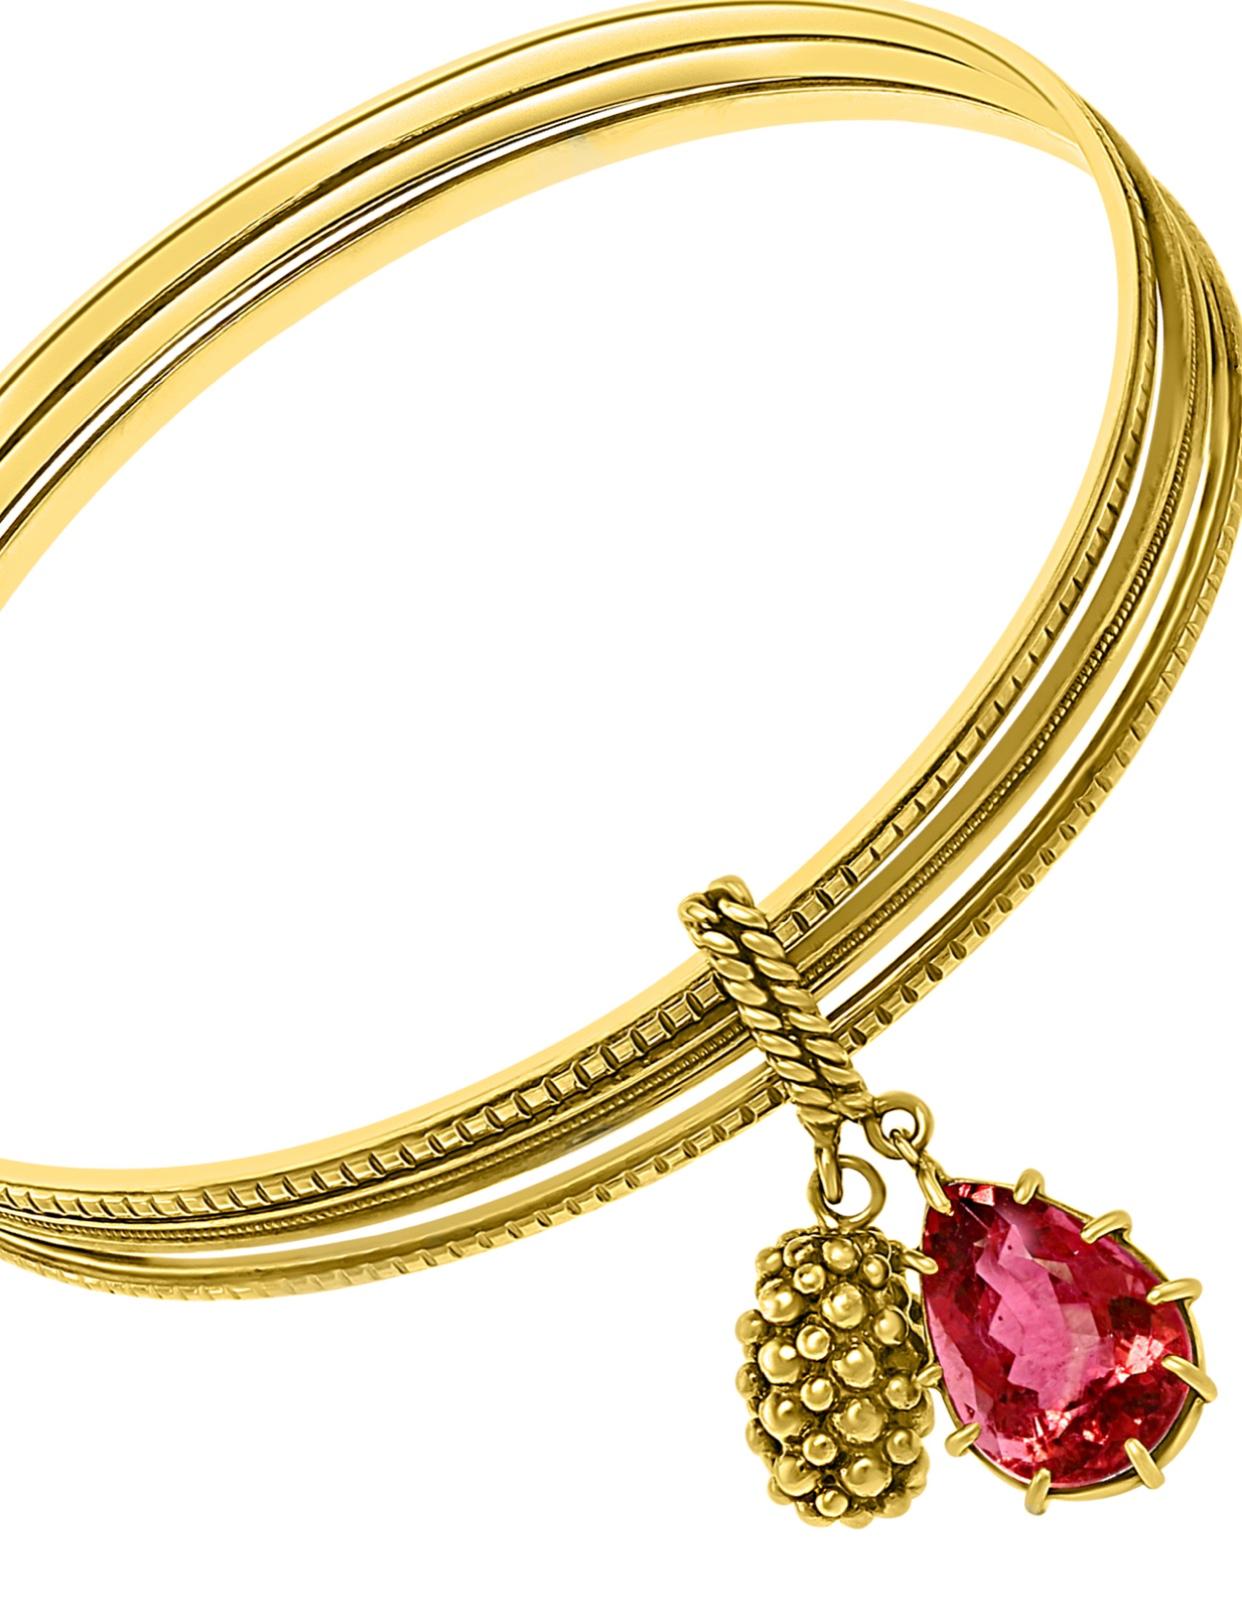 gold bangle with charm